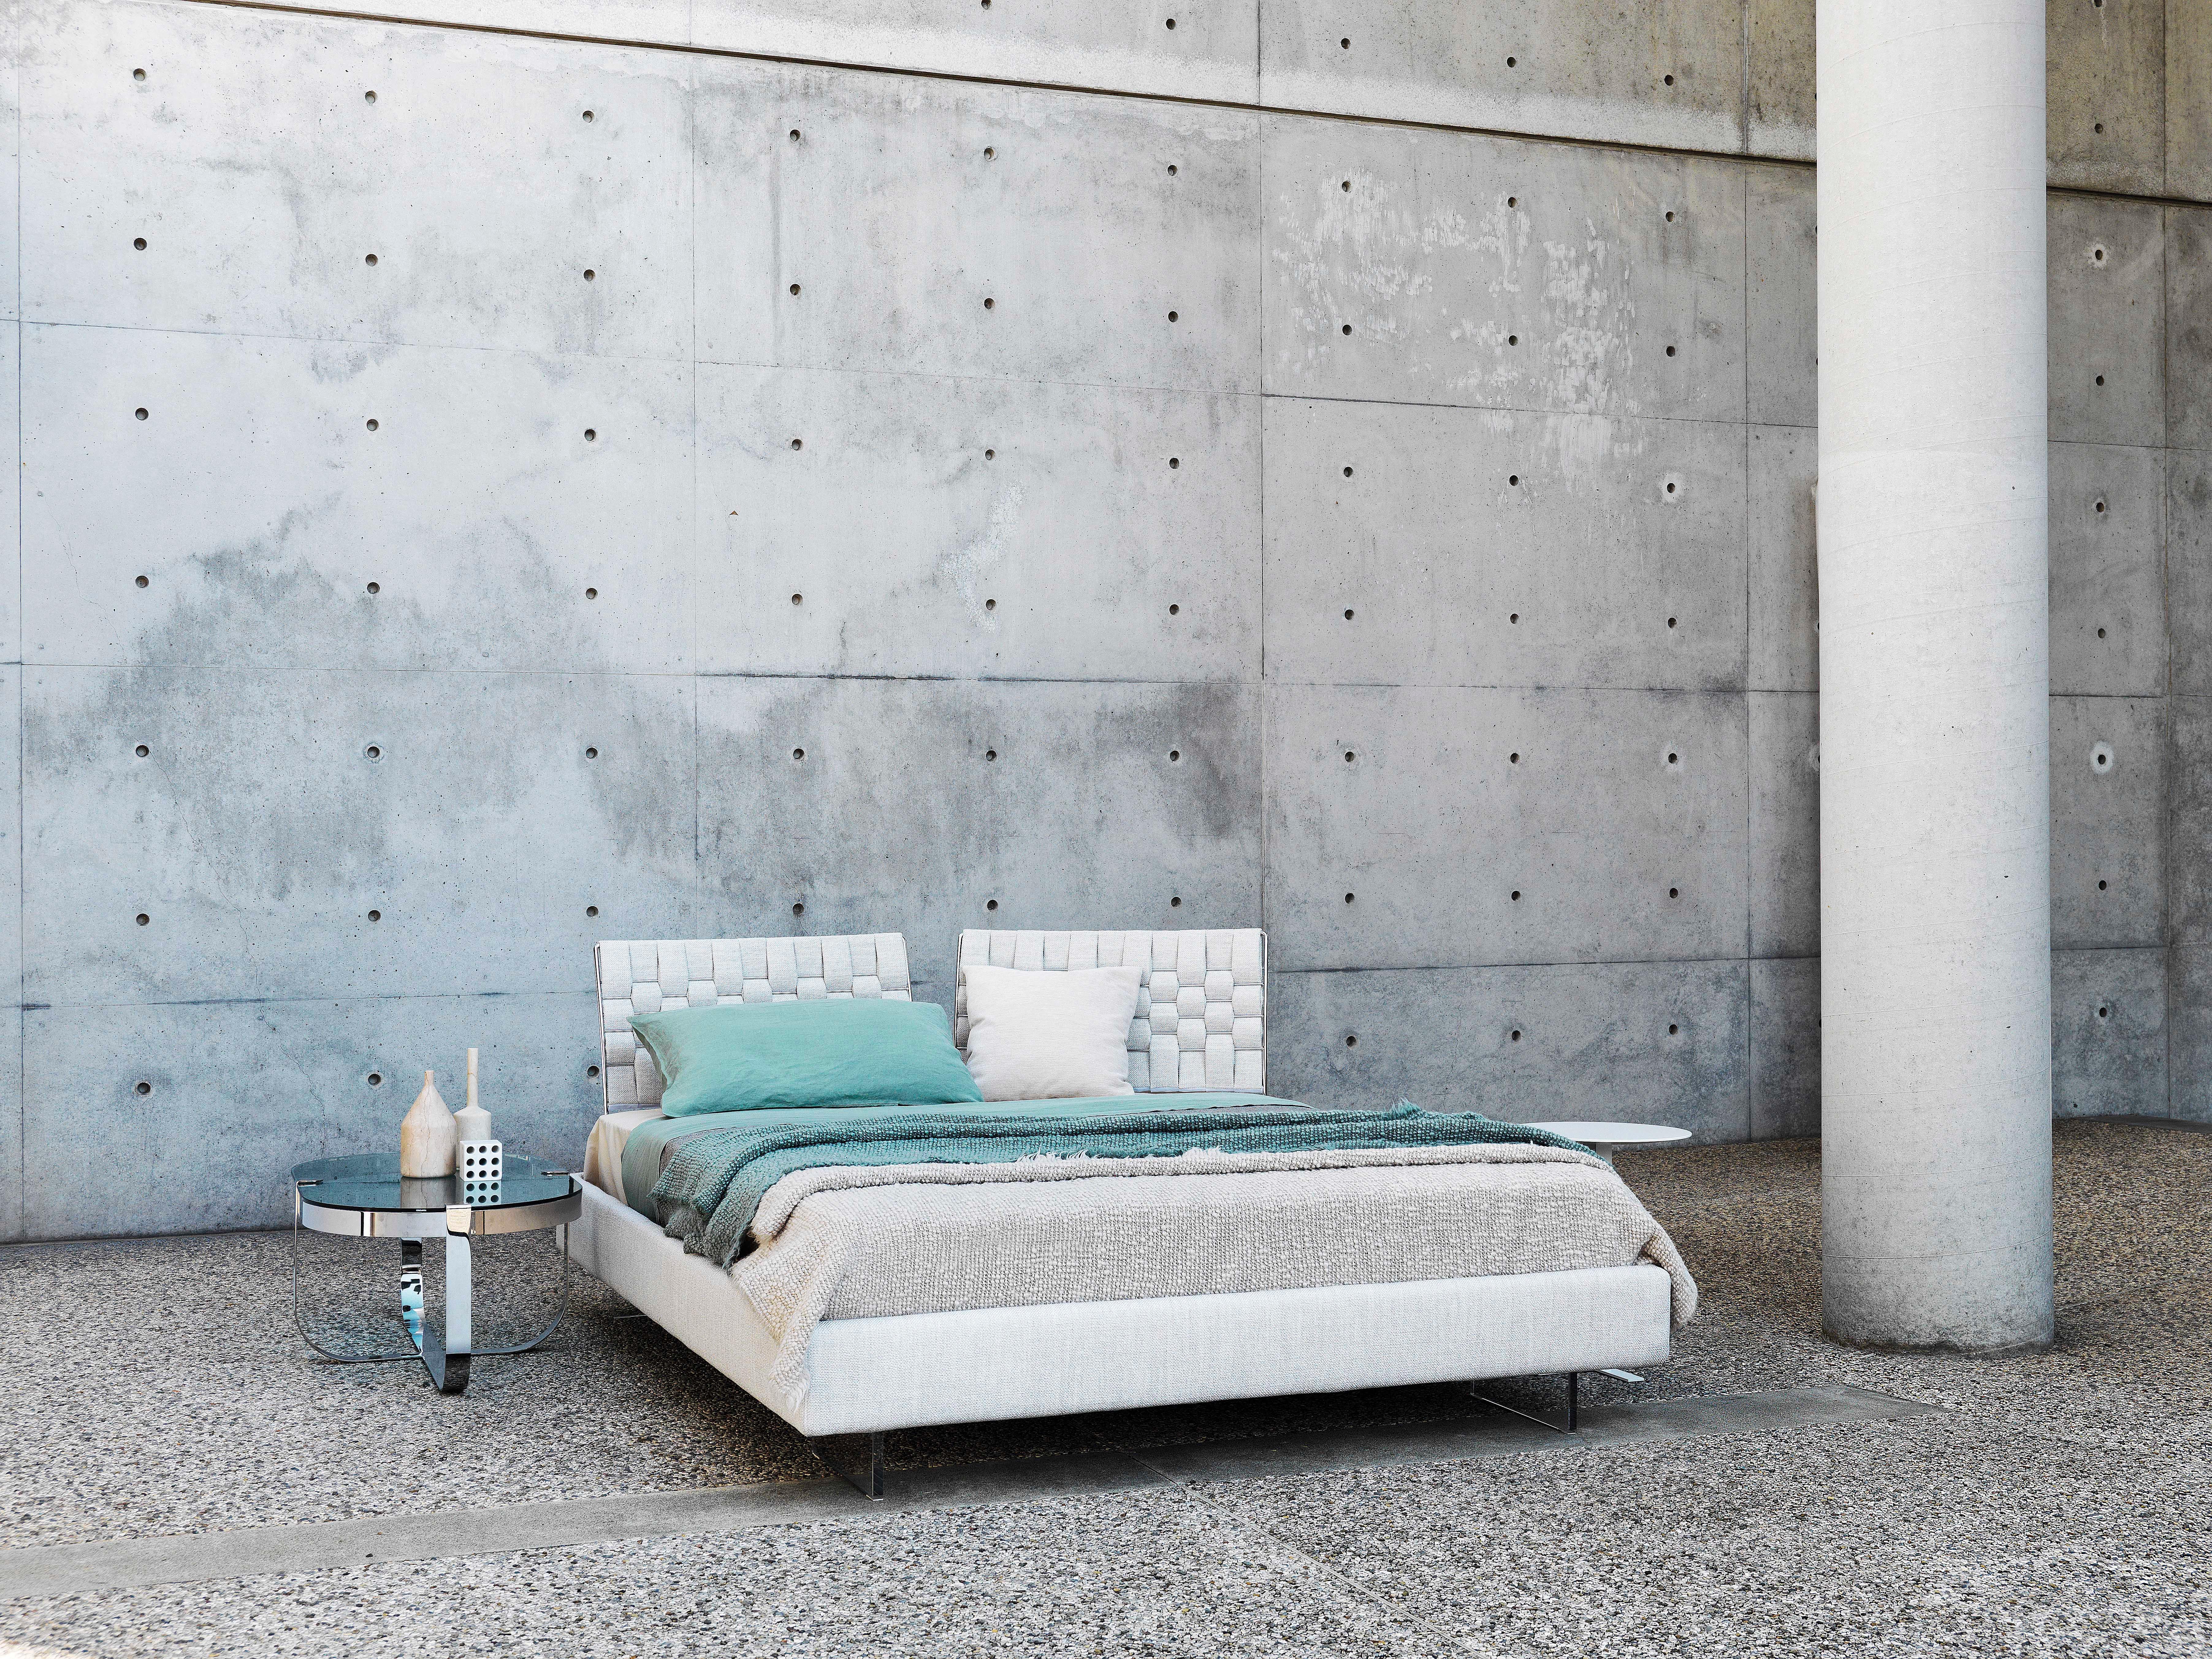 The Limes bed maintains the intelligent functionality that characterises the sofa line but has been adapted for a different interior area and function. The lightweight mobile island appears to be floating on its 14 cm rectangular transparent legs.